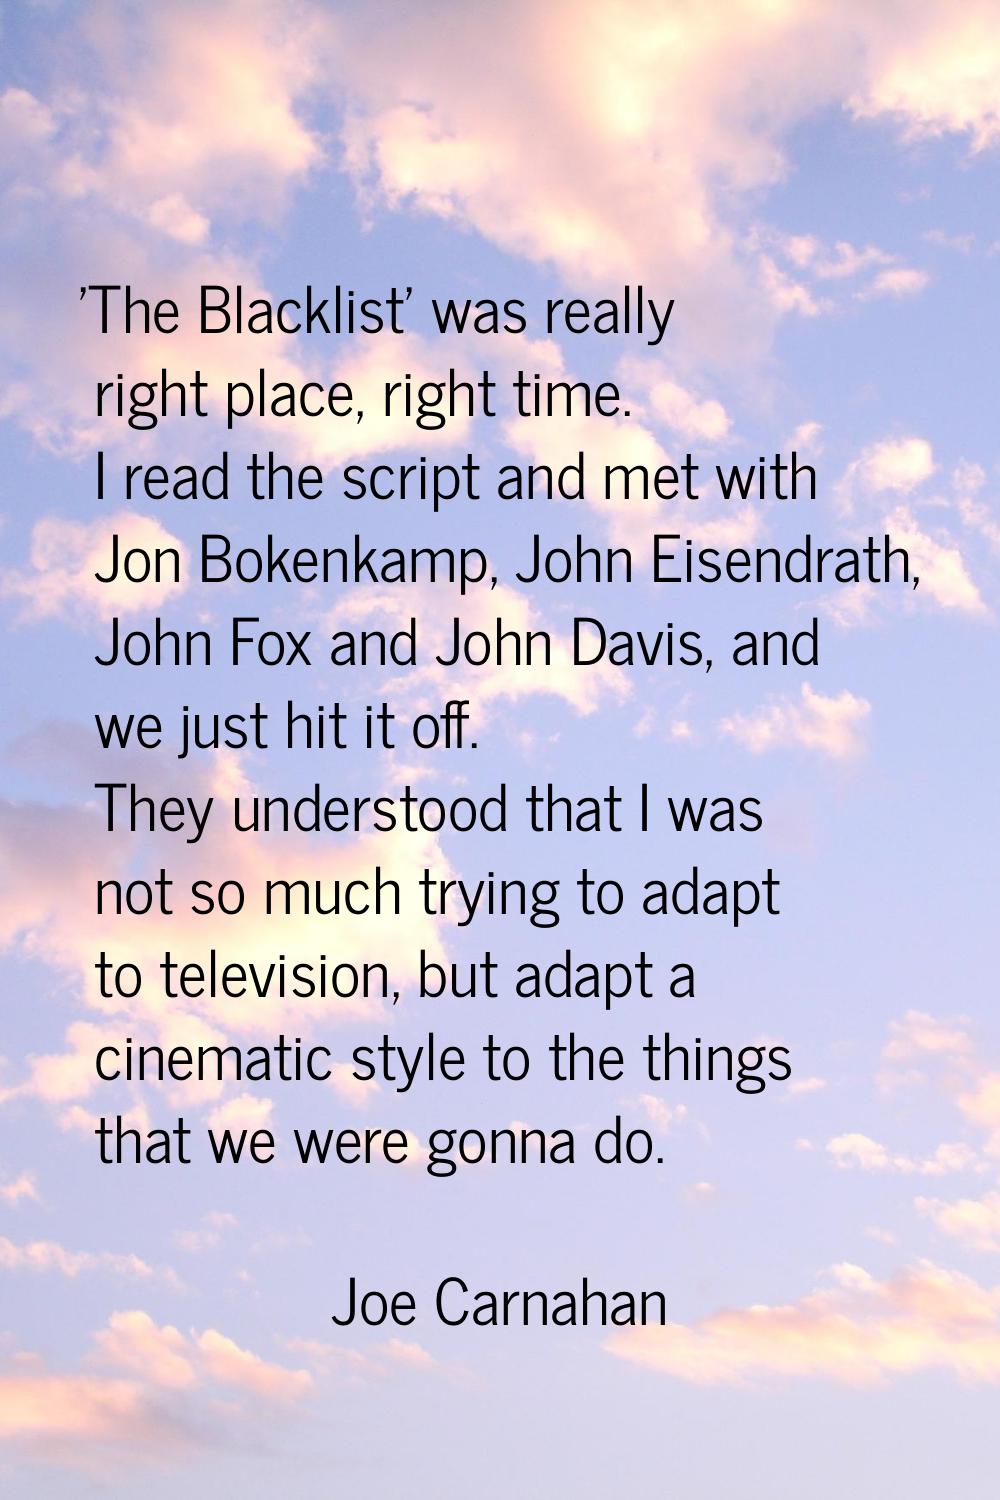 'The Blacklist' was really right place, right time. I read the script and met with Jon Bokenkamp, J